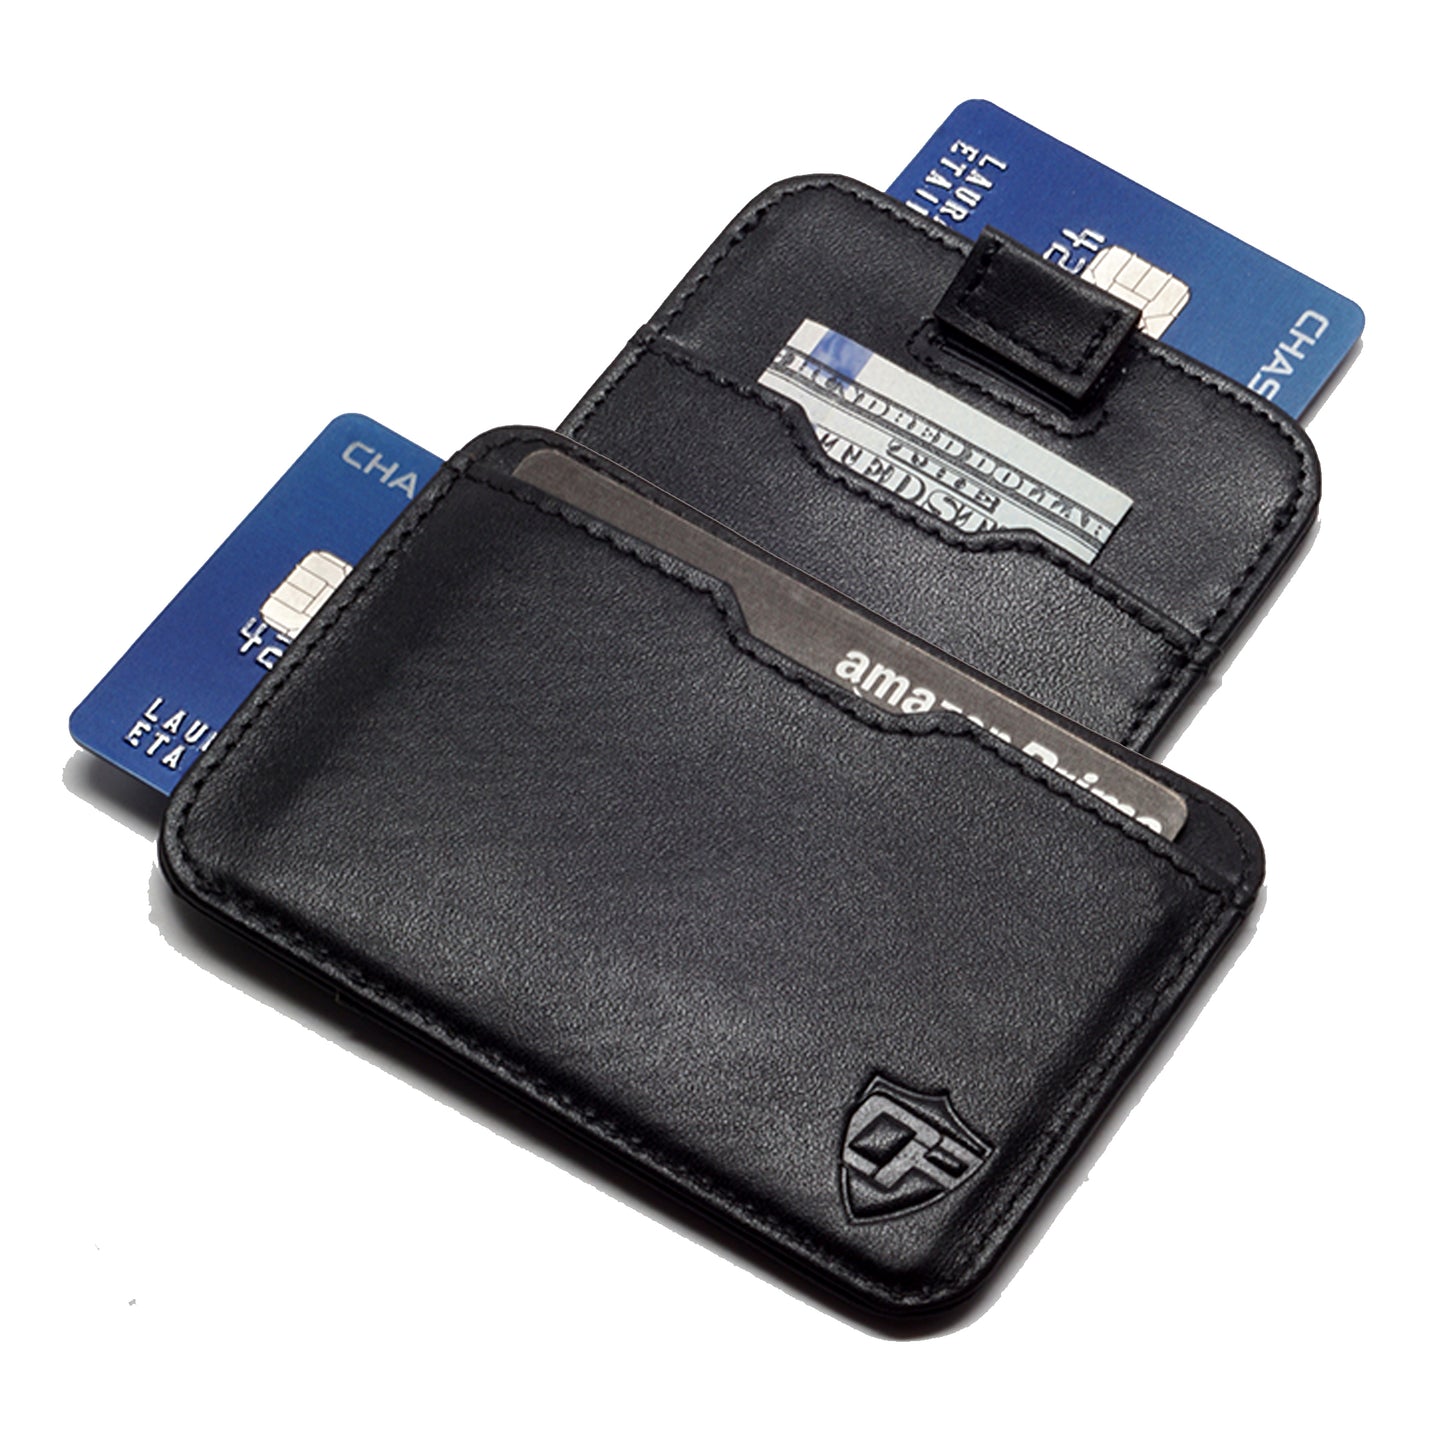 Card Blocr Pull Tab Wallet in Black Leather